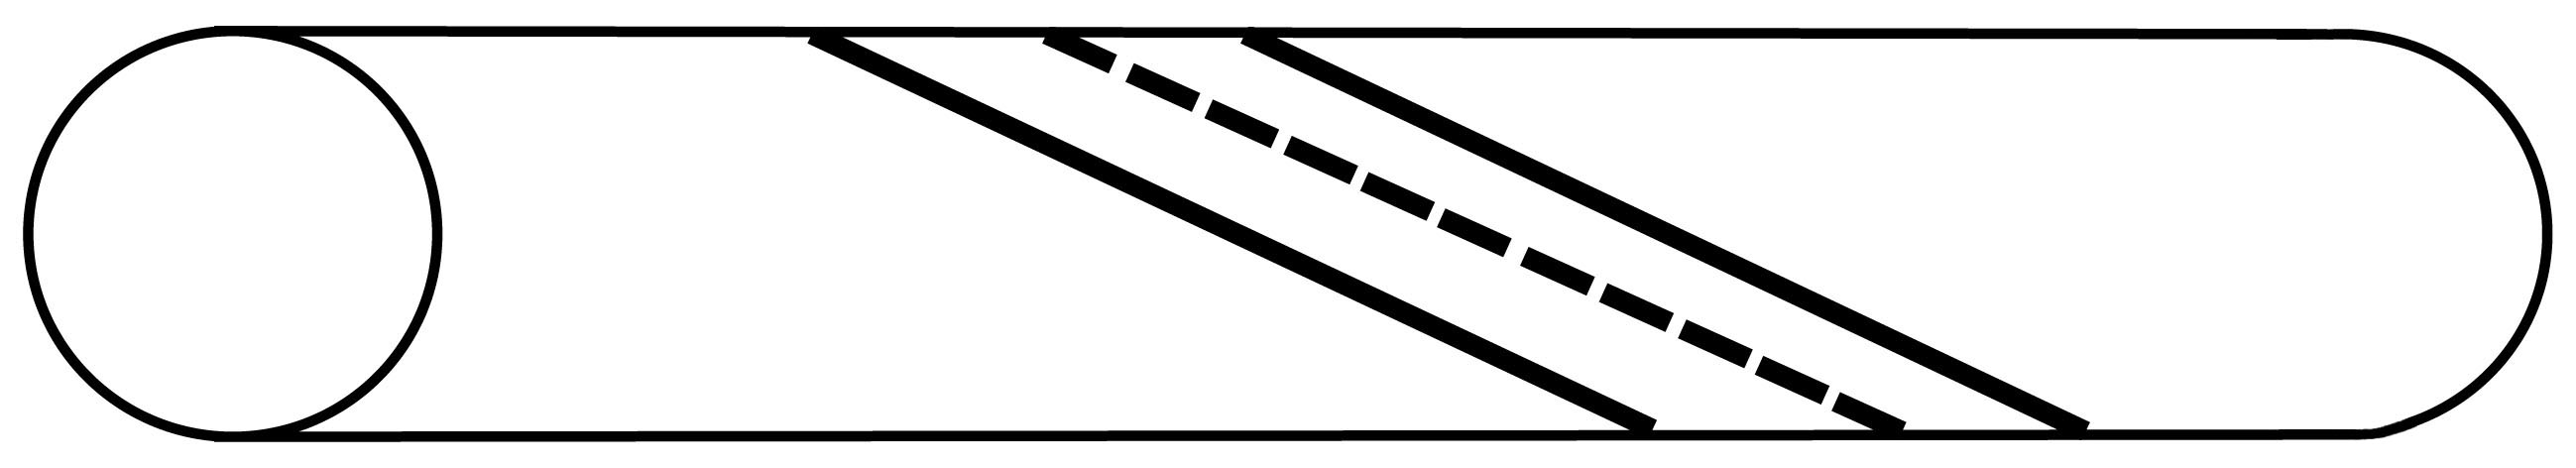 Drawing handrail with diagonal joint